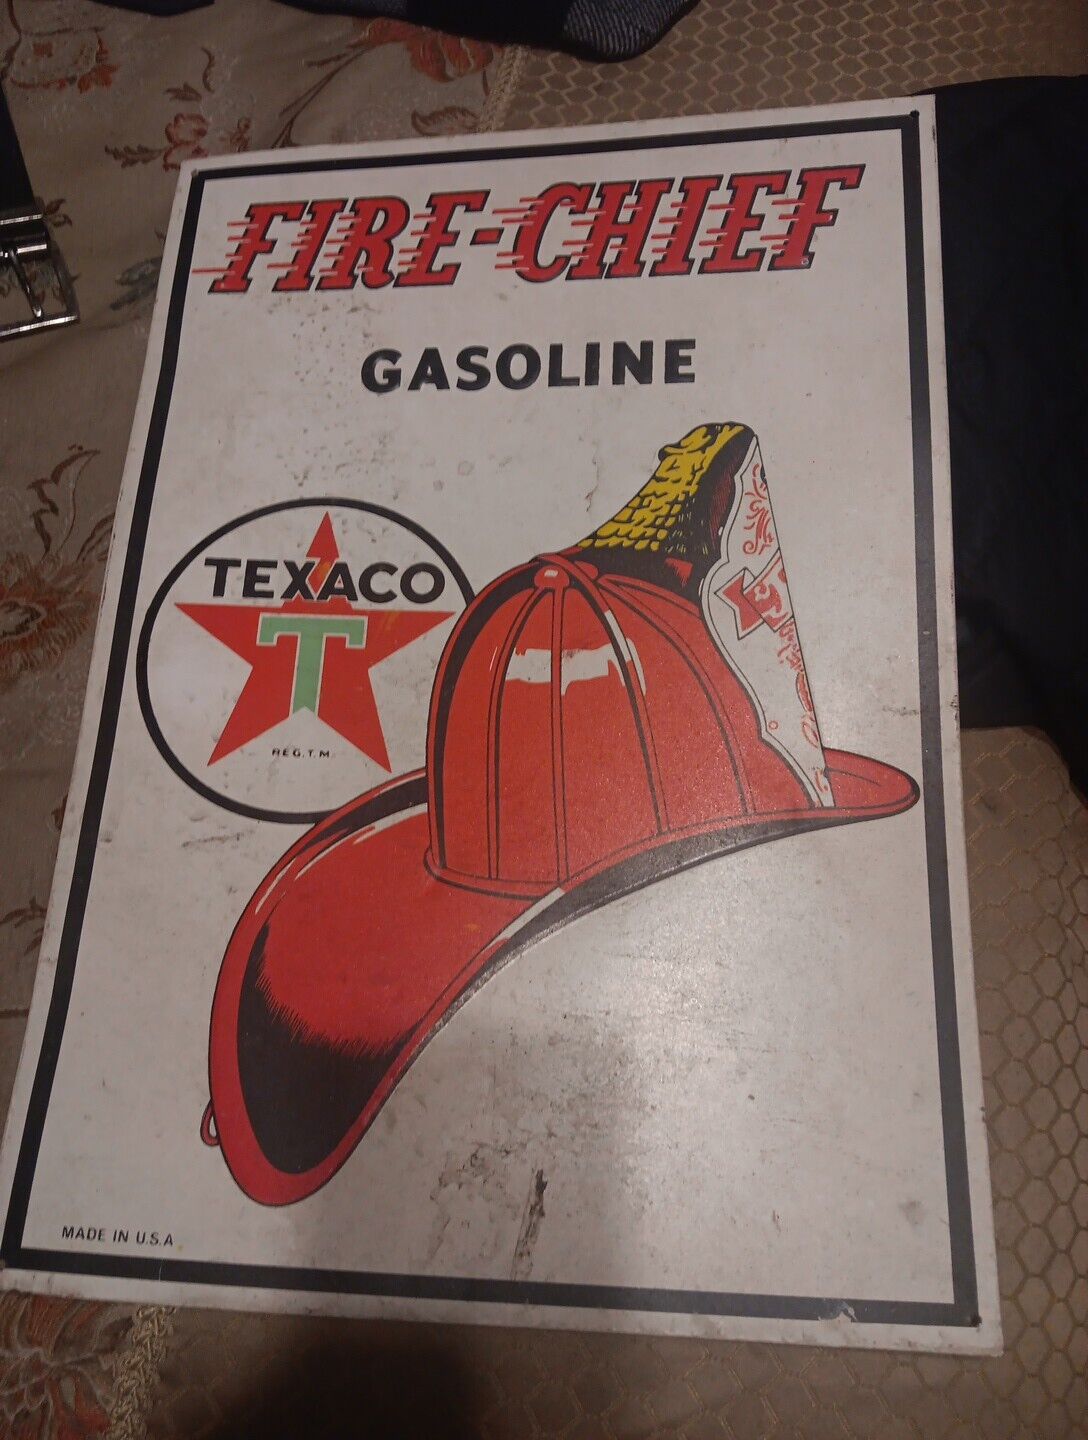 Rare Vintage 1957 Texaco Fire Chief Gasoline Gas Station Metal Advertising Sign